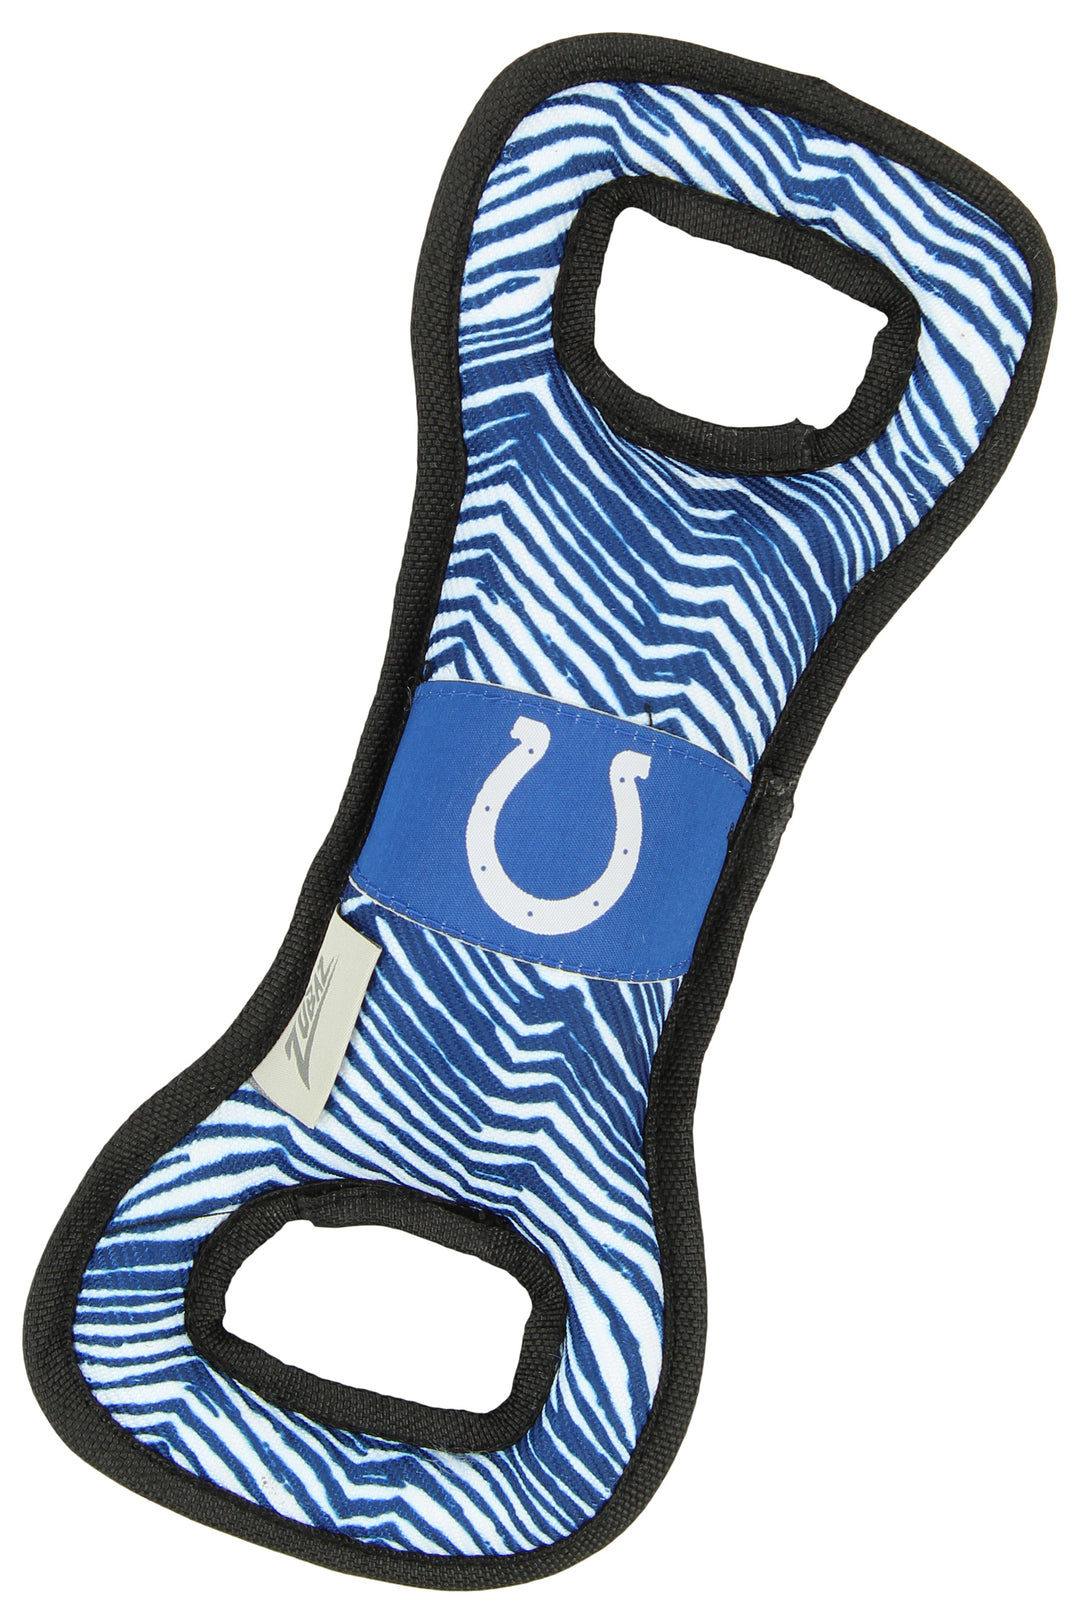 Zubaz X Pets First NFL Indianapolis Colts Team Logo Dog Tug Toy with Squeaker